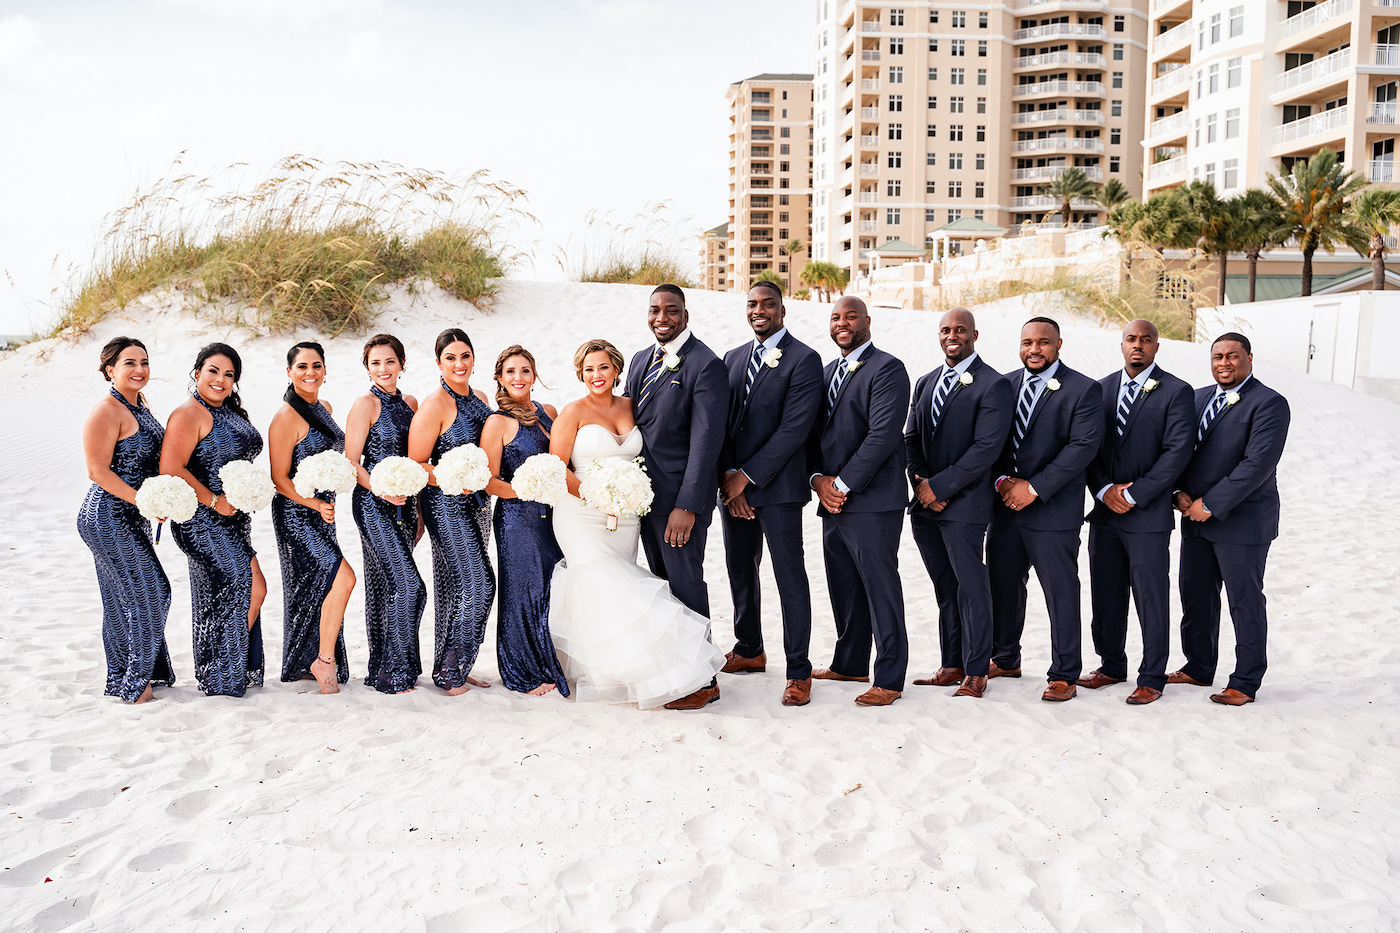 Romantic Tropical Florida Wedding Party, Bride and Groom Beachfront Portraits, Bridesmaids Wearing Matching Sophisticated Navy Sequined Halter Dresses, Bride Fit and Flare Strapless Wedding Dress Holding Ivory and White Round Floral Bouquet | Florida Gulf of Mexico Hotel and Wedding Venue Hilton Clearwater Beach